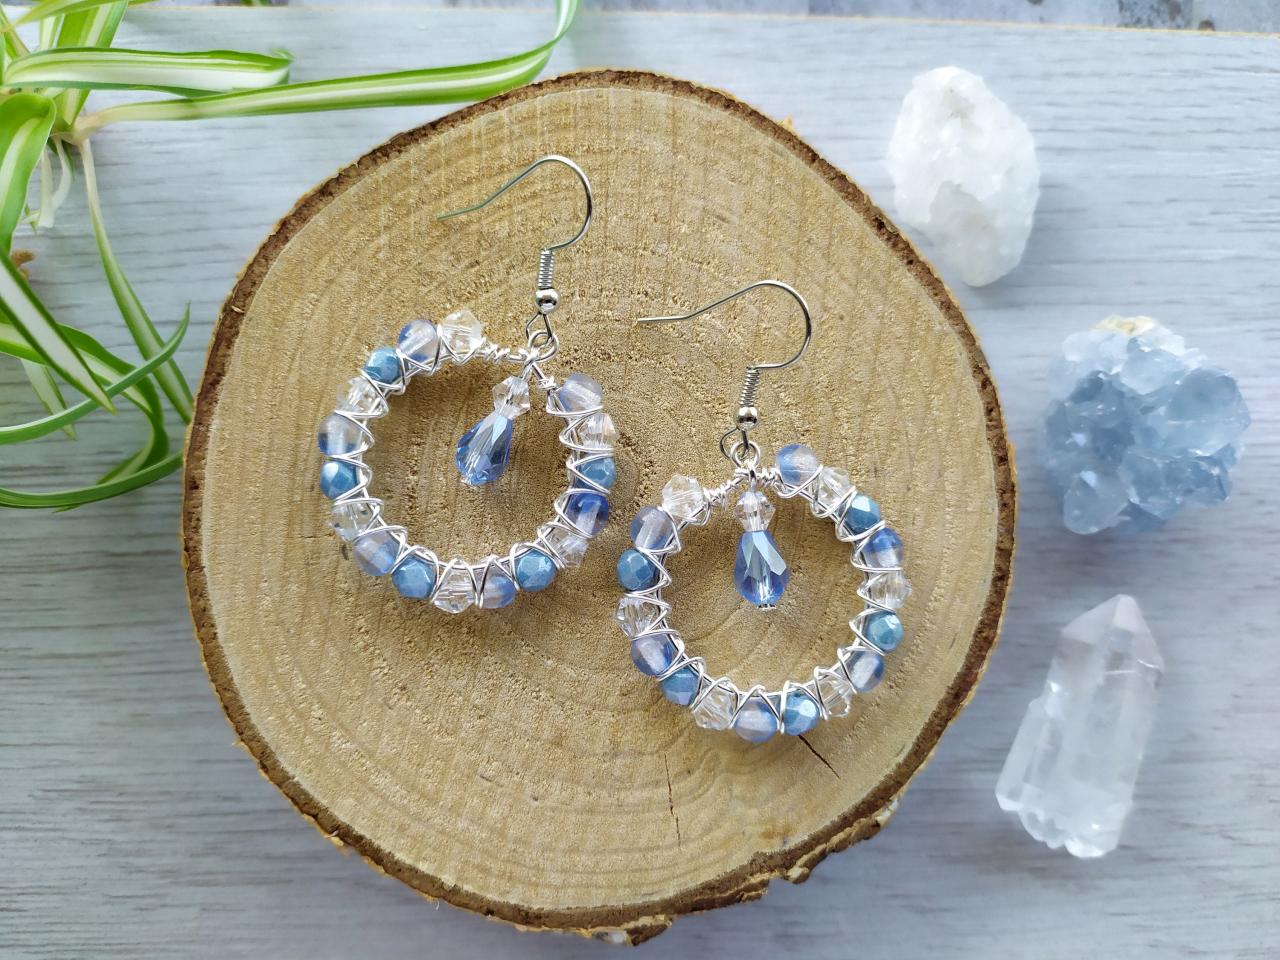 Dreamy Blue And Clear Hoop Earrings, Small Hoops With Faceted Glass Beads, Pastel Blue Boho Earrings, Dainty Wire Wrapped Hoops With Dangle